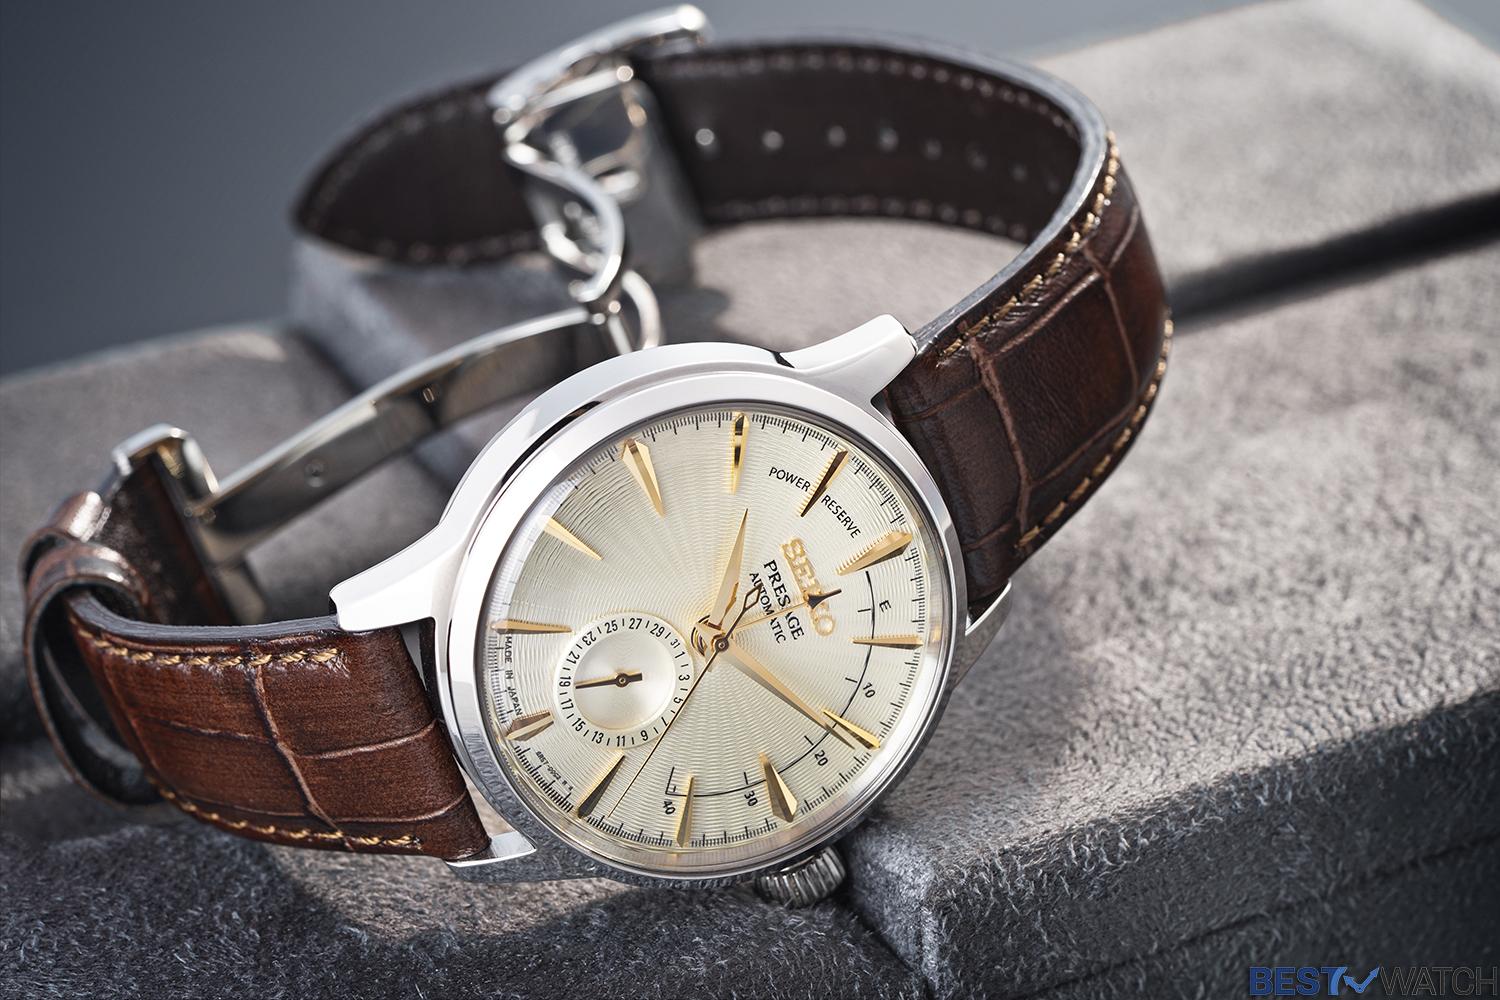 Seiko Presage: A Closer Look At One of the Best Japanese Watch Collections